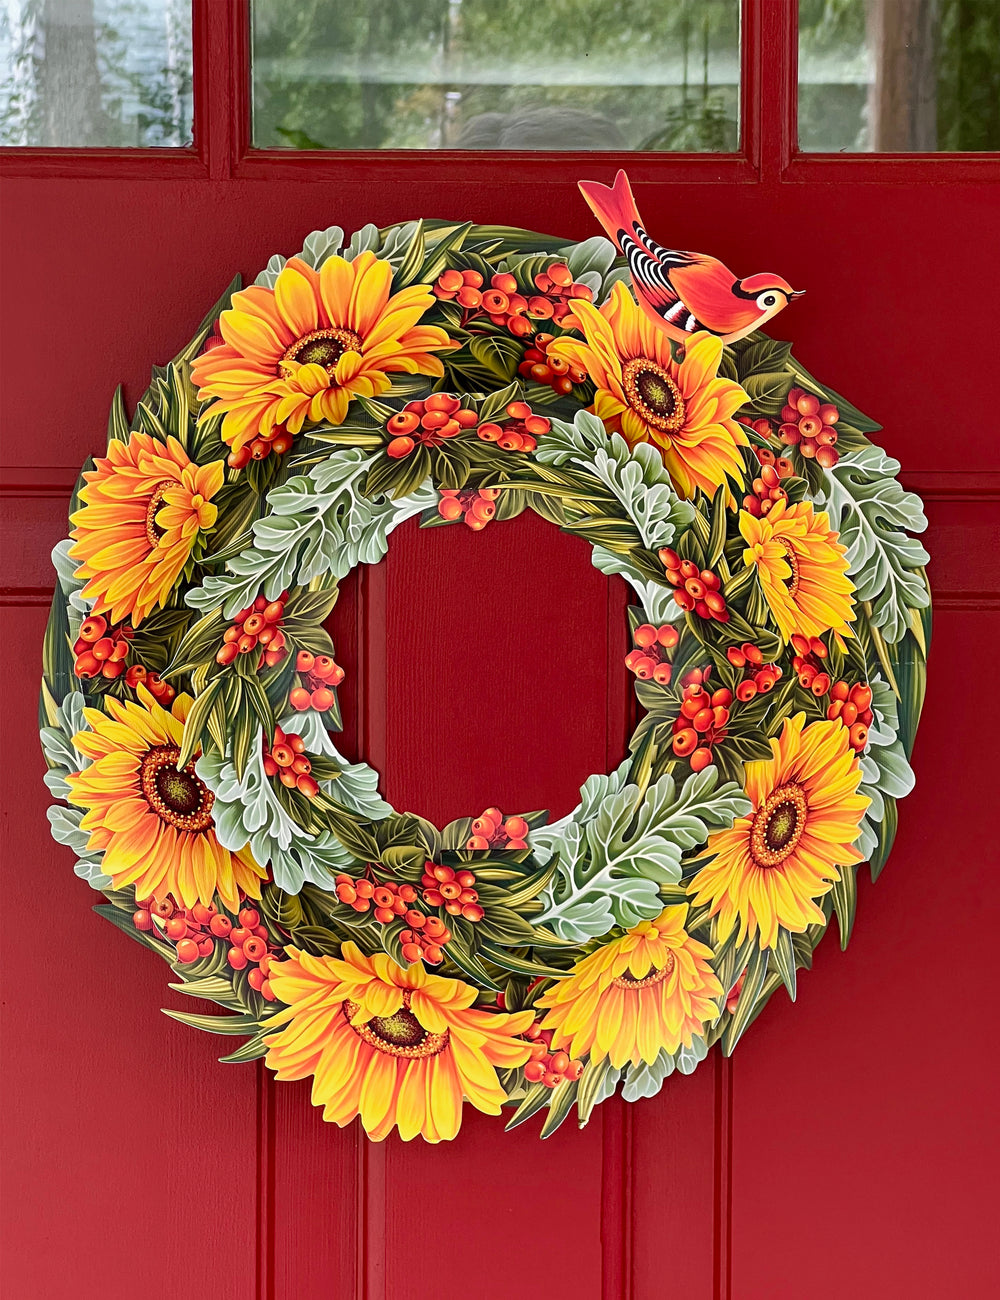 Welcome the season with FreshCut Paper's spectacular sculptural pop-up wreath! This elegant table centerpiece or door hanging wreath features autumnal visions of sunflowers, hypericum berries, and dusty miller, and an attachable song bird for extra festivity.